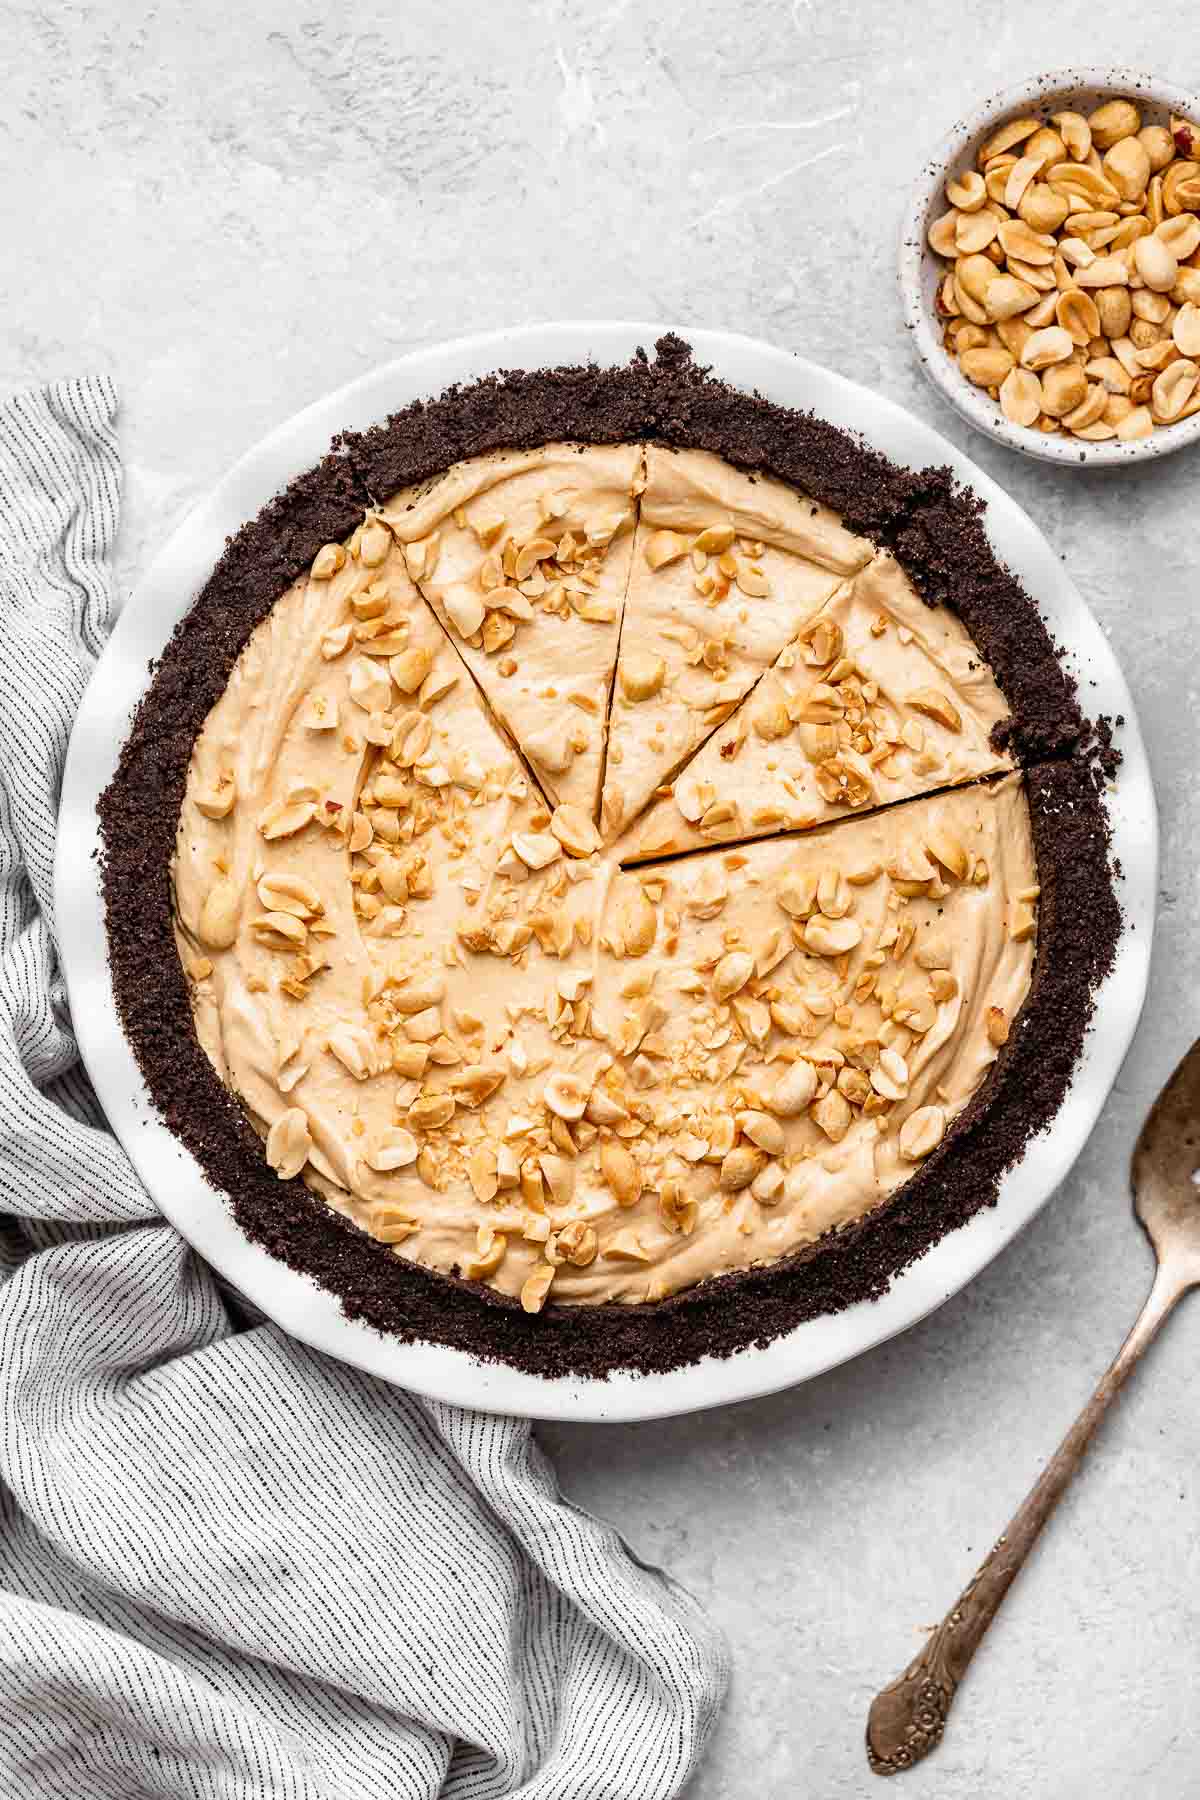 Oreo Peanut Butter Whip Pie in pie dish with chopped peanuts on top